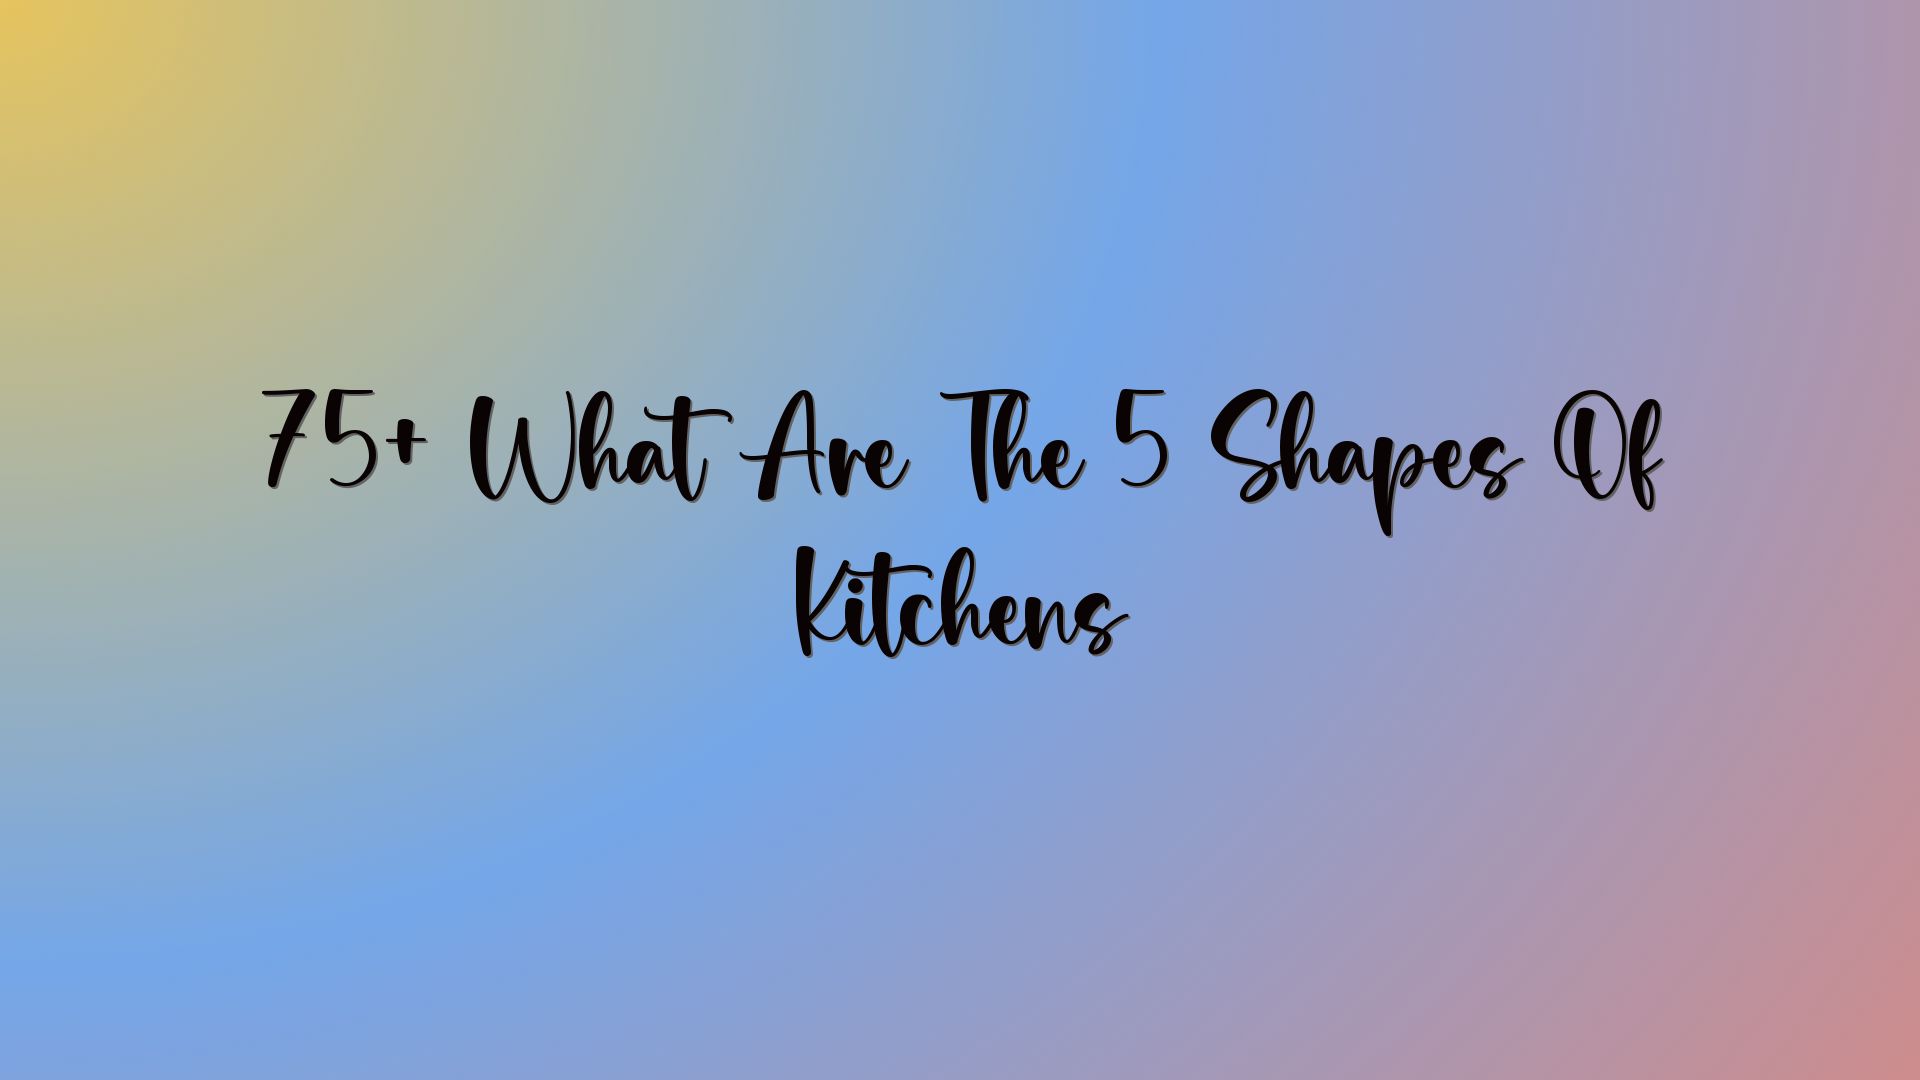 75+ What Are The 5 Shapes Of Kitchens